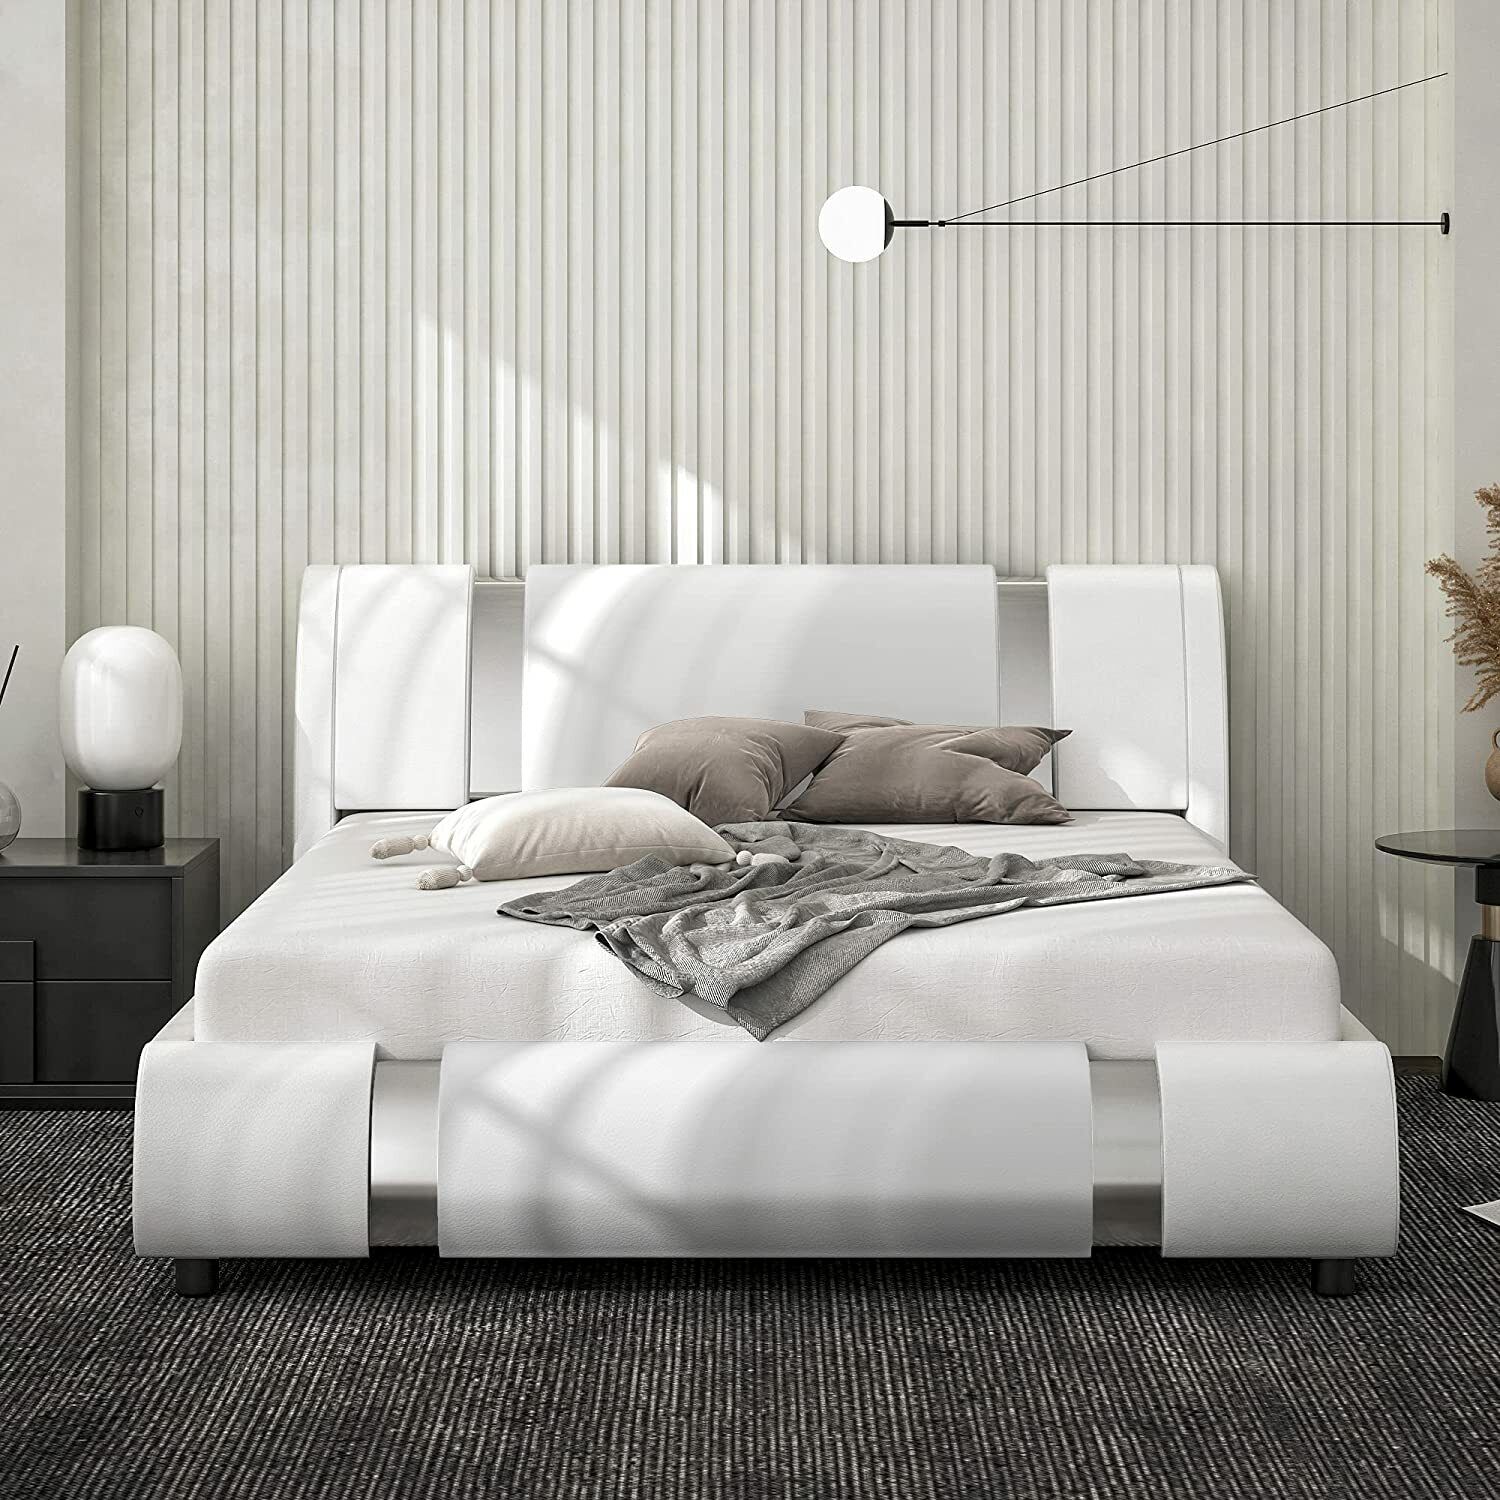 King Size Platform Bed Frame with Luxury Solid Faux Leather Upholstery, White unbrand XRCHX001